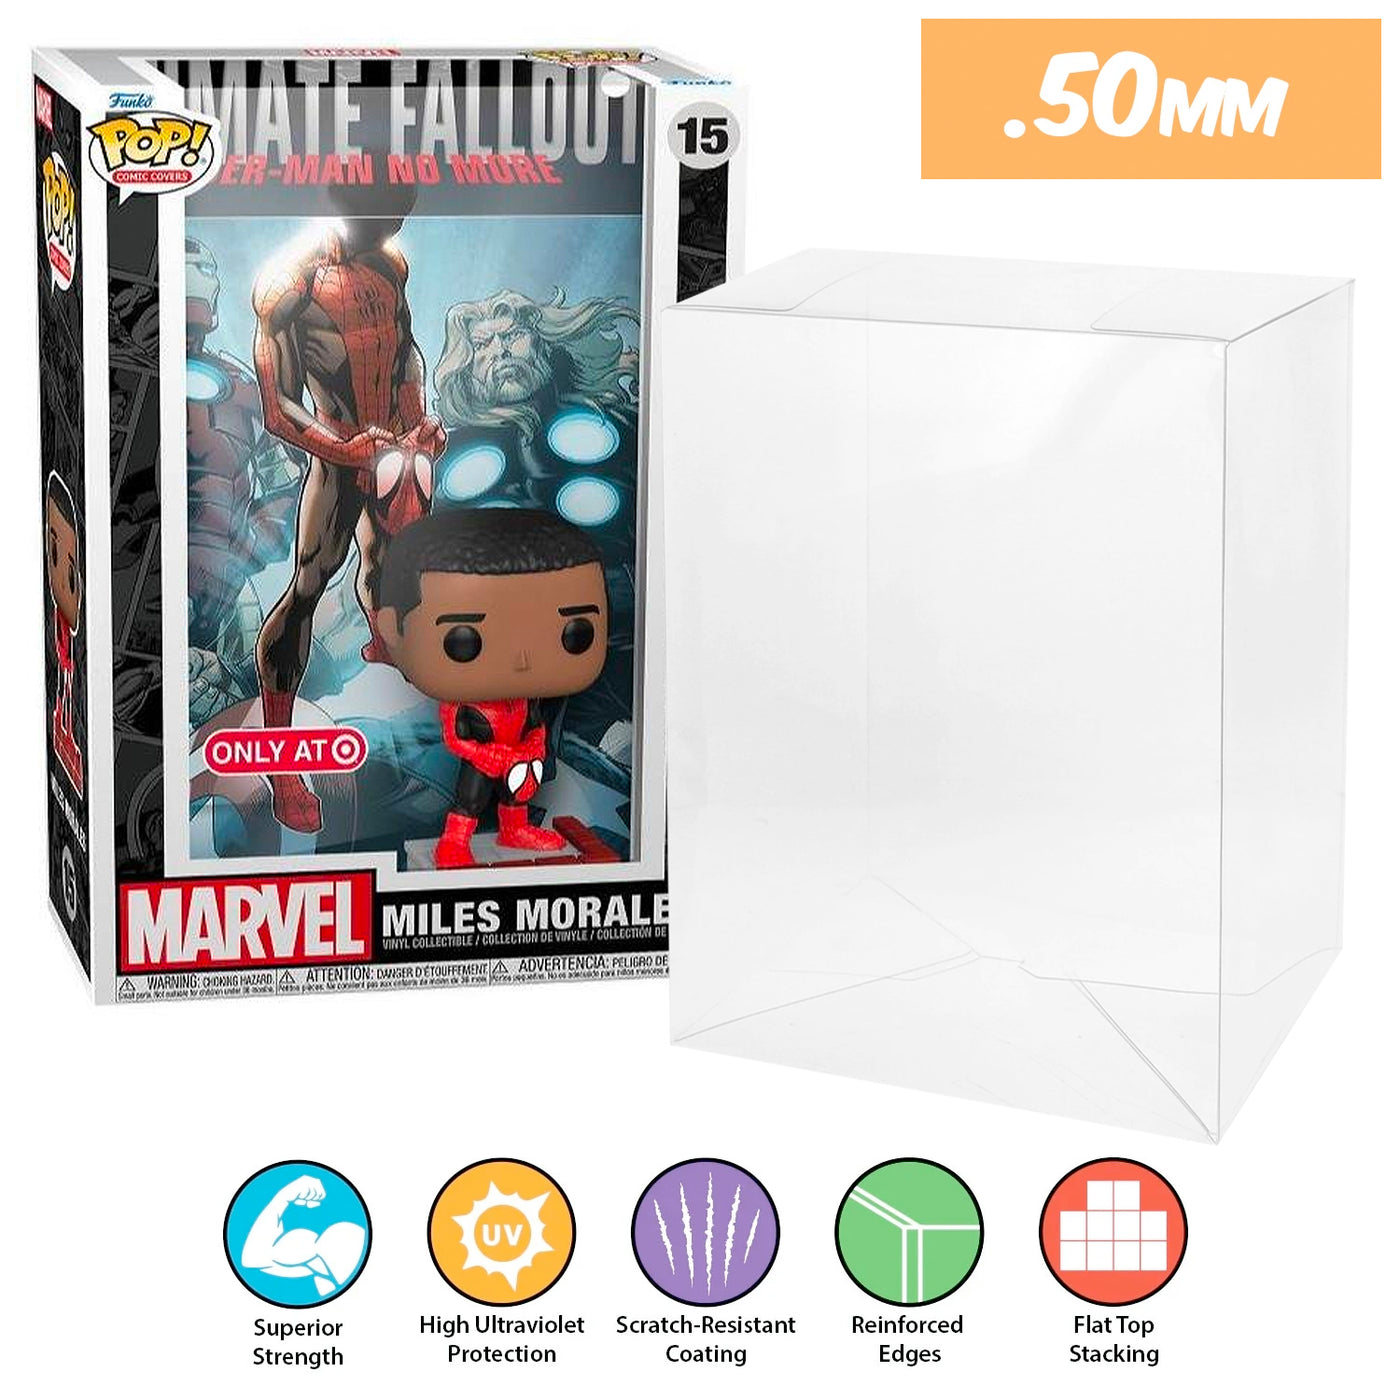 marvel miles morales target pop comic covers best funko pop protectors thick strong uv scratch flat top stack vinyl display geek plastic shield vaulted eco armor fits collect protect display case kollector protector